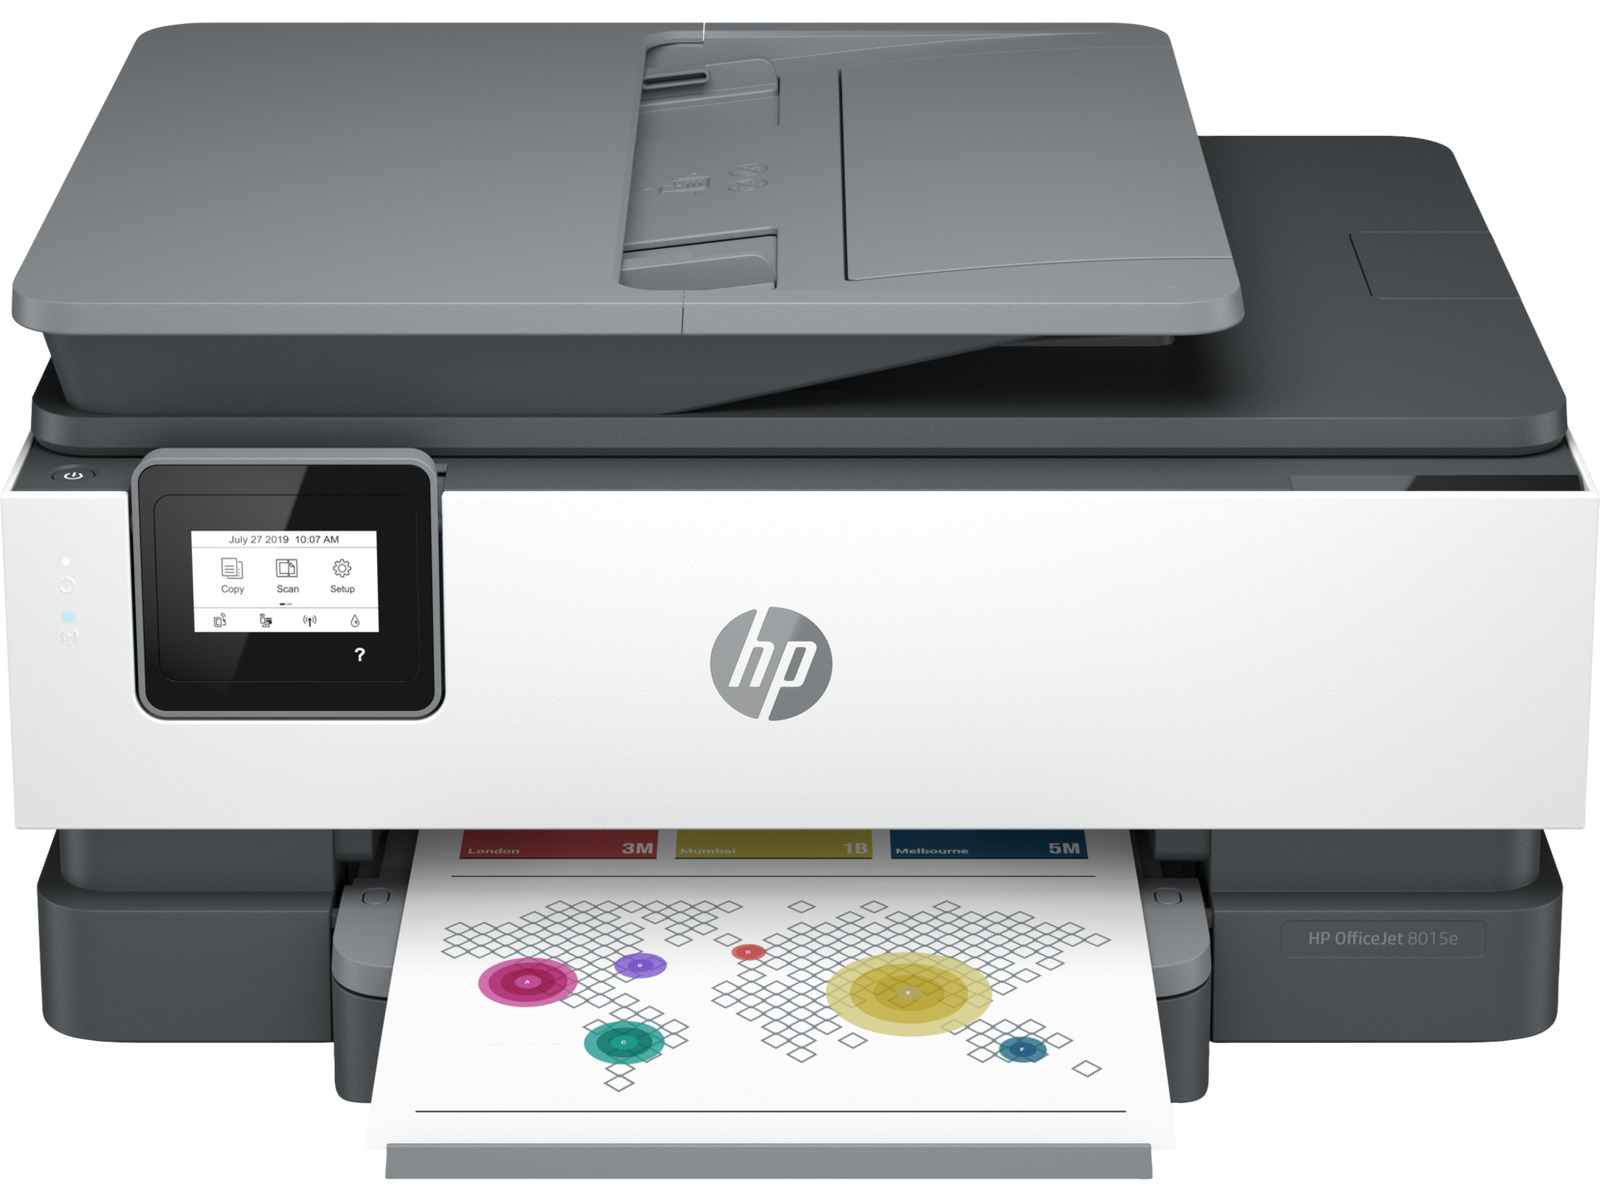 HP OfficeJet 8015e All-in-One Printer w/ bonus 3 months Instant Ink through HP+